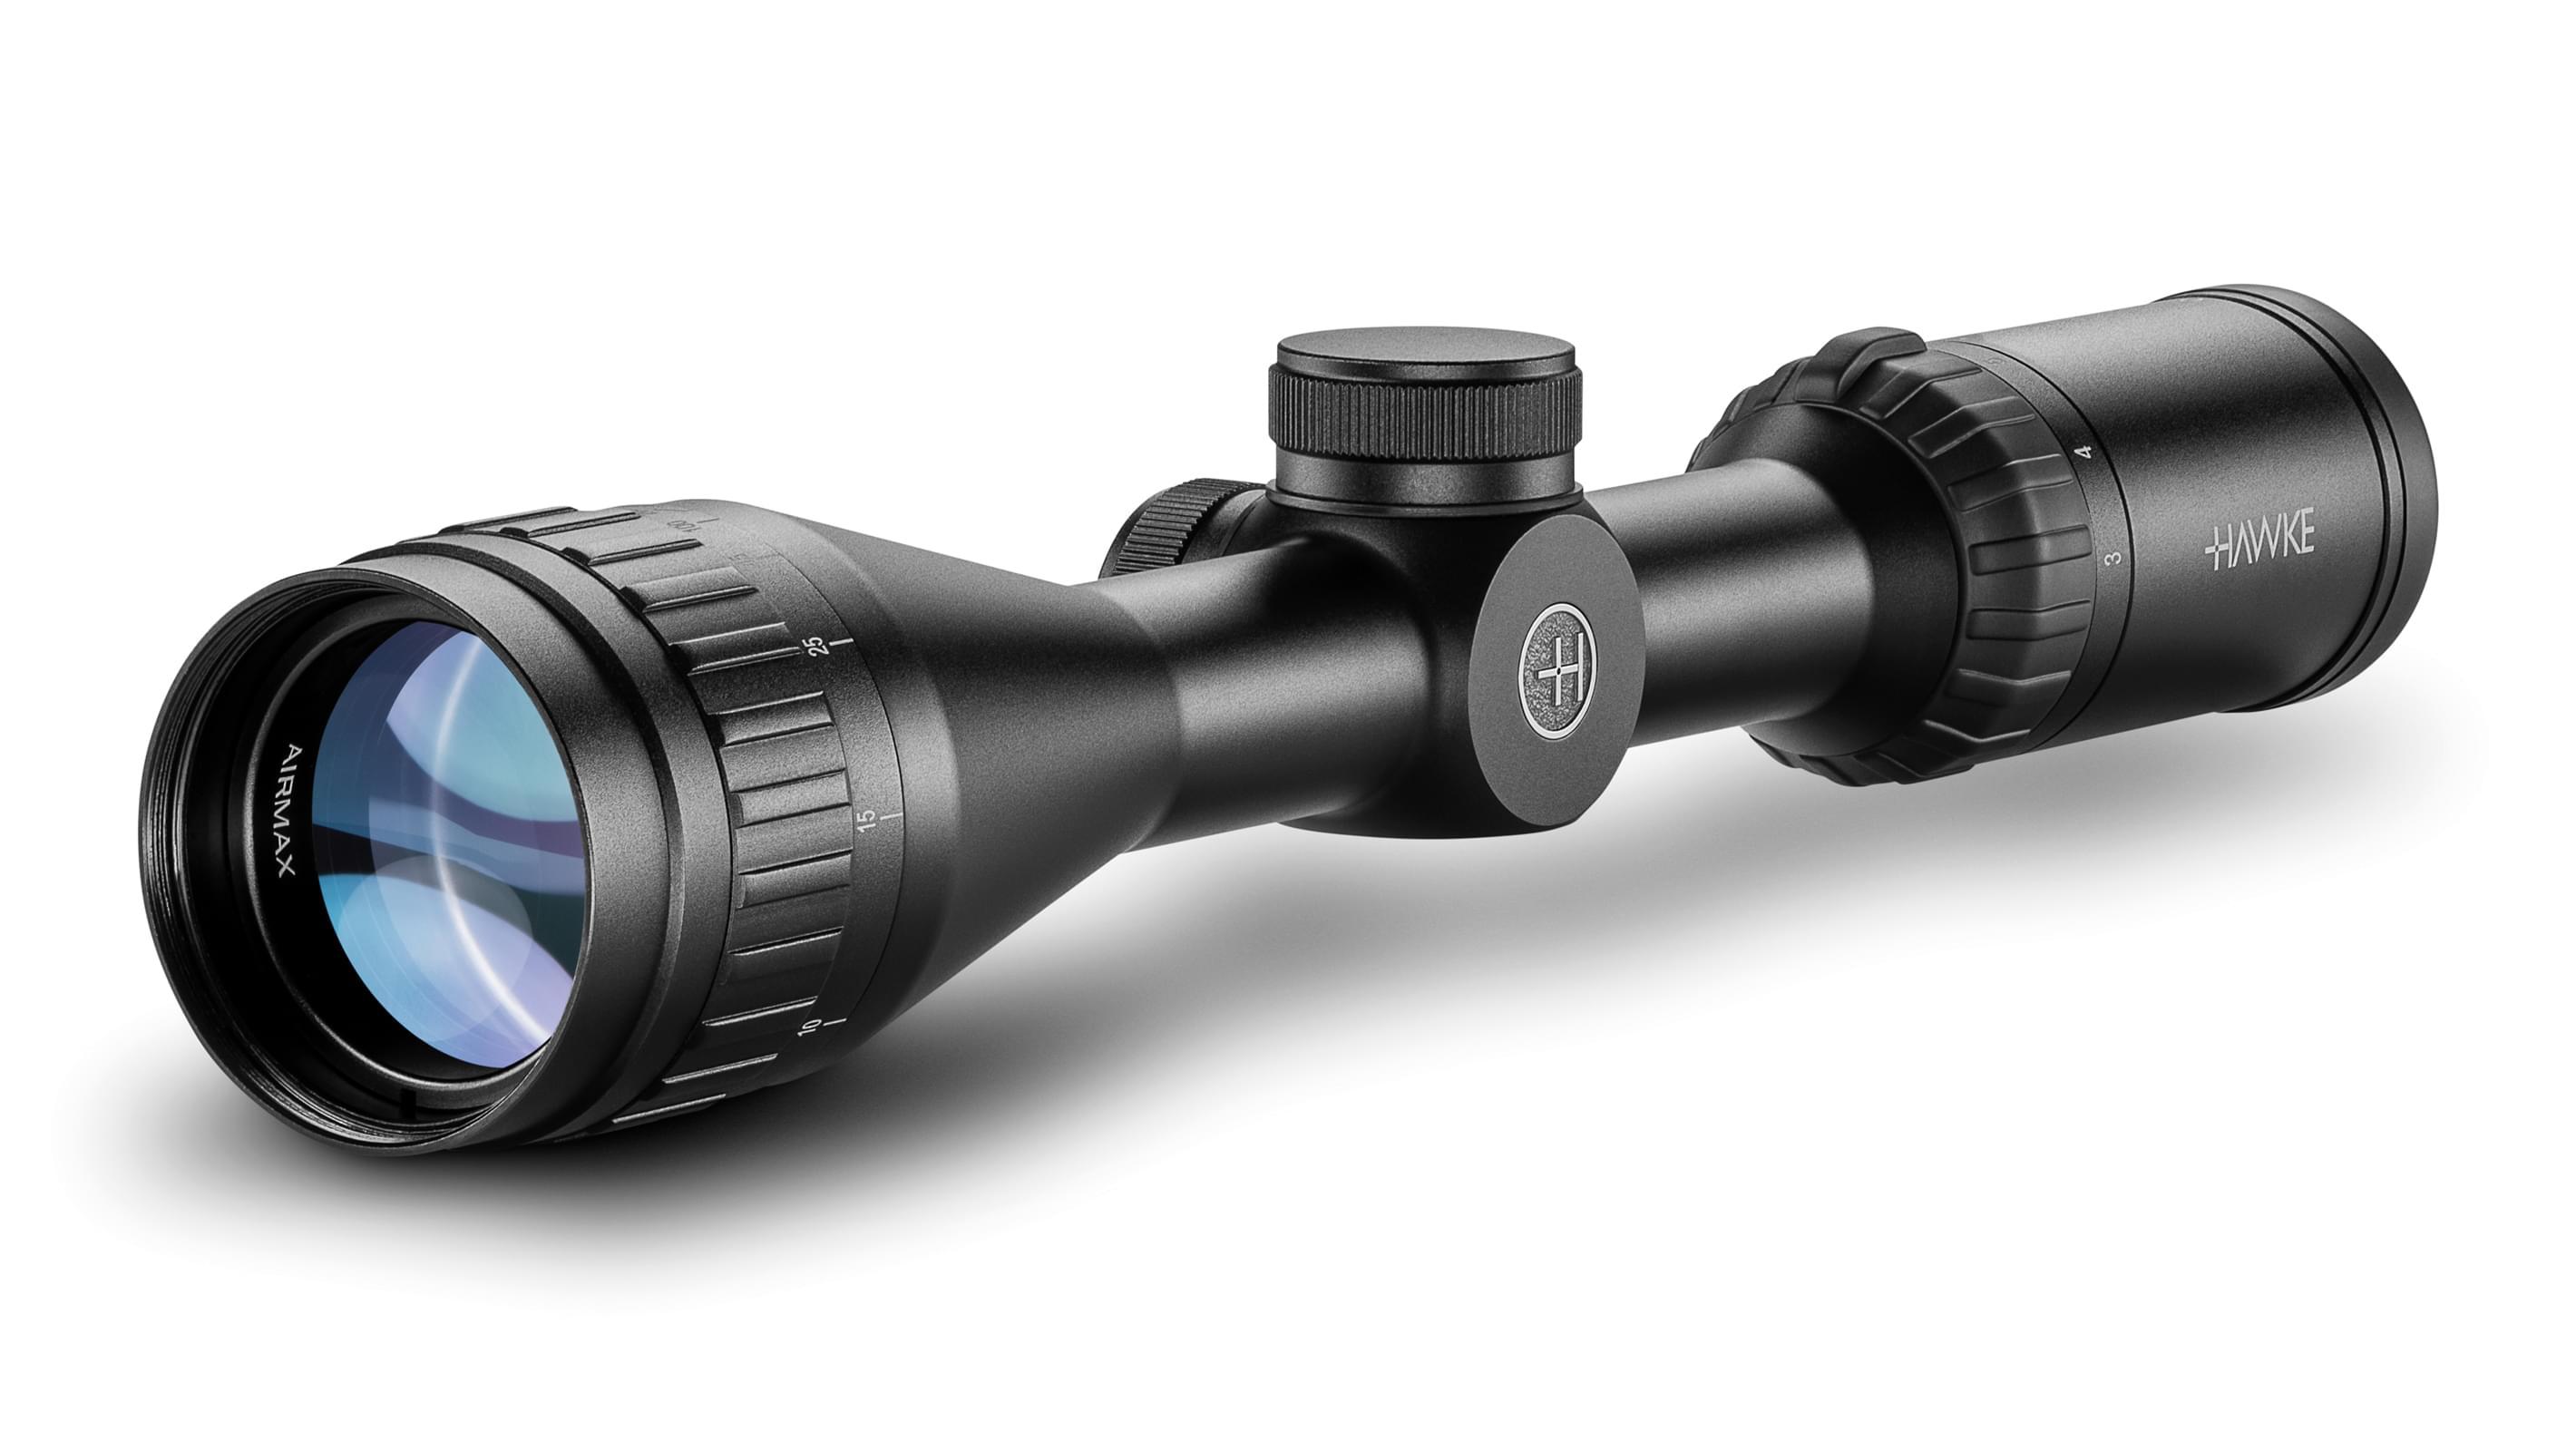 HAWKE AIRMAX 3-9x40 AO SCOPE AMX RETICLE - 13110 - NeonSales South Africa